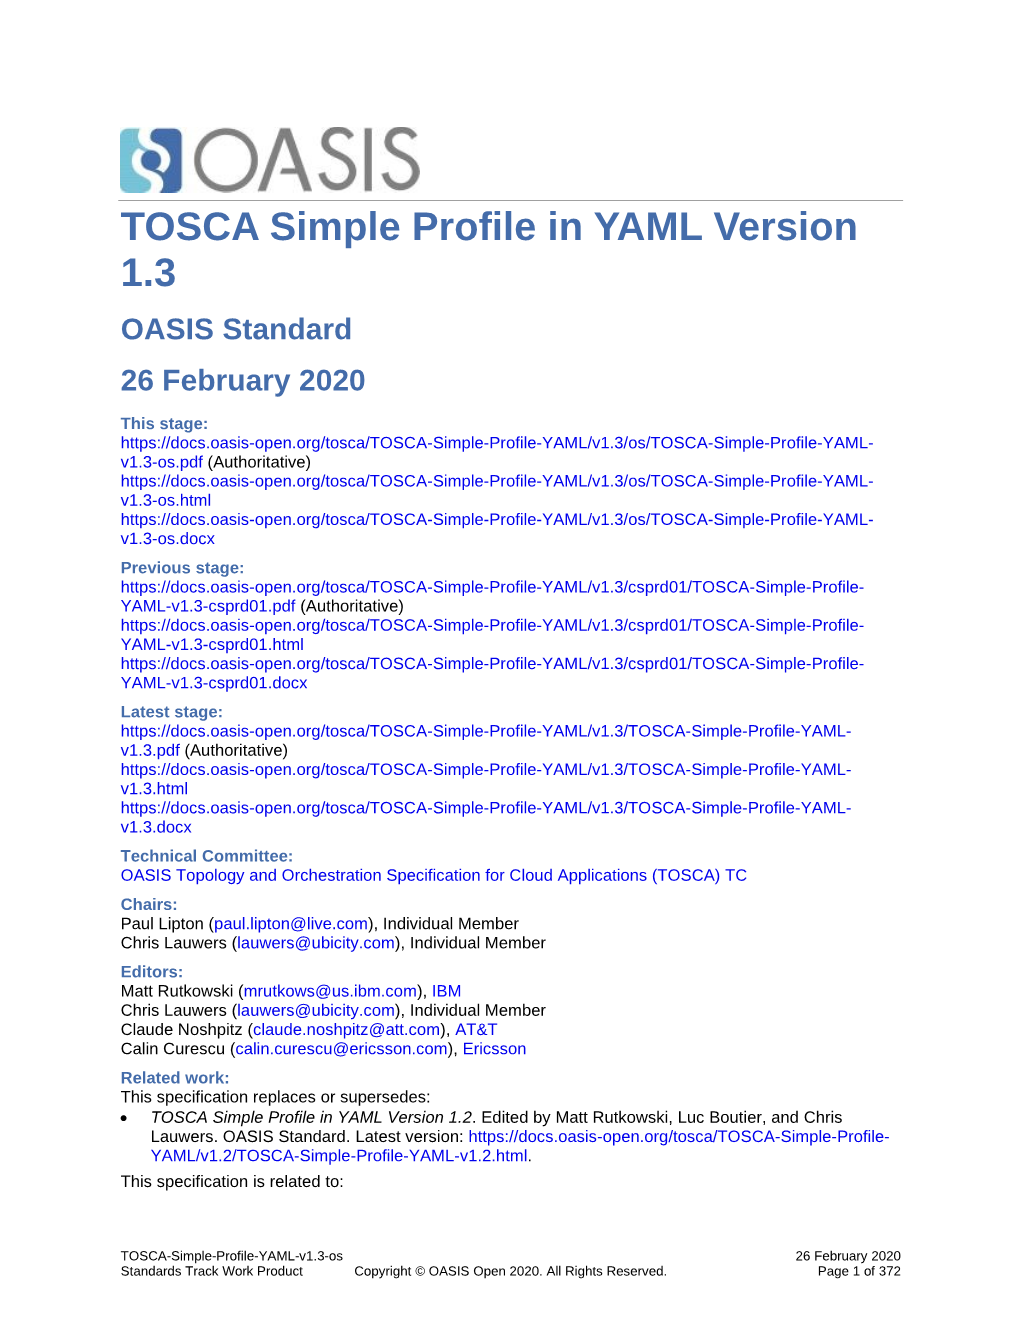 TOSCA Simple Profile in YAML Version 1.3 OASIS Standard 26 February 2020